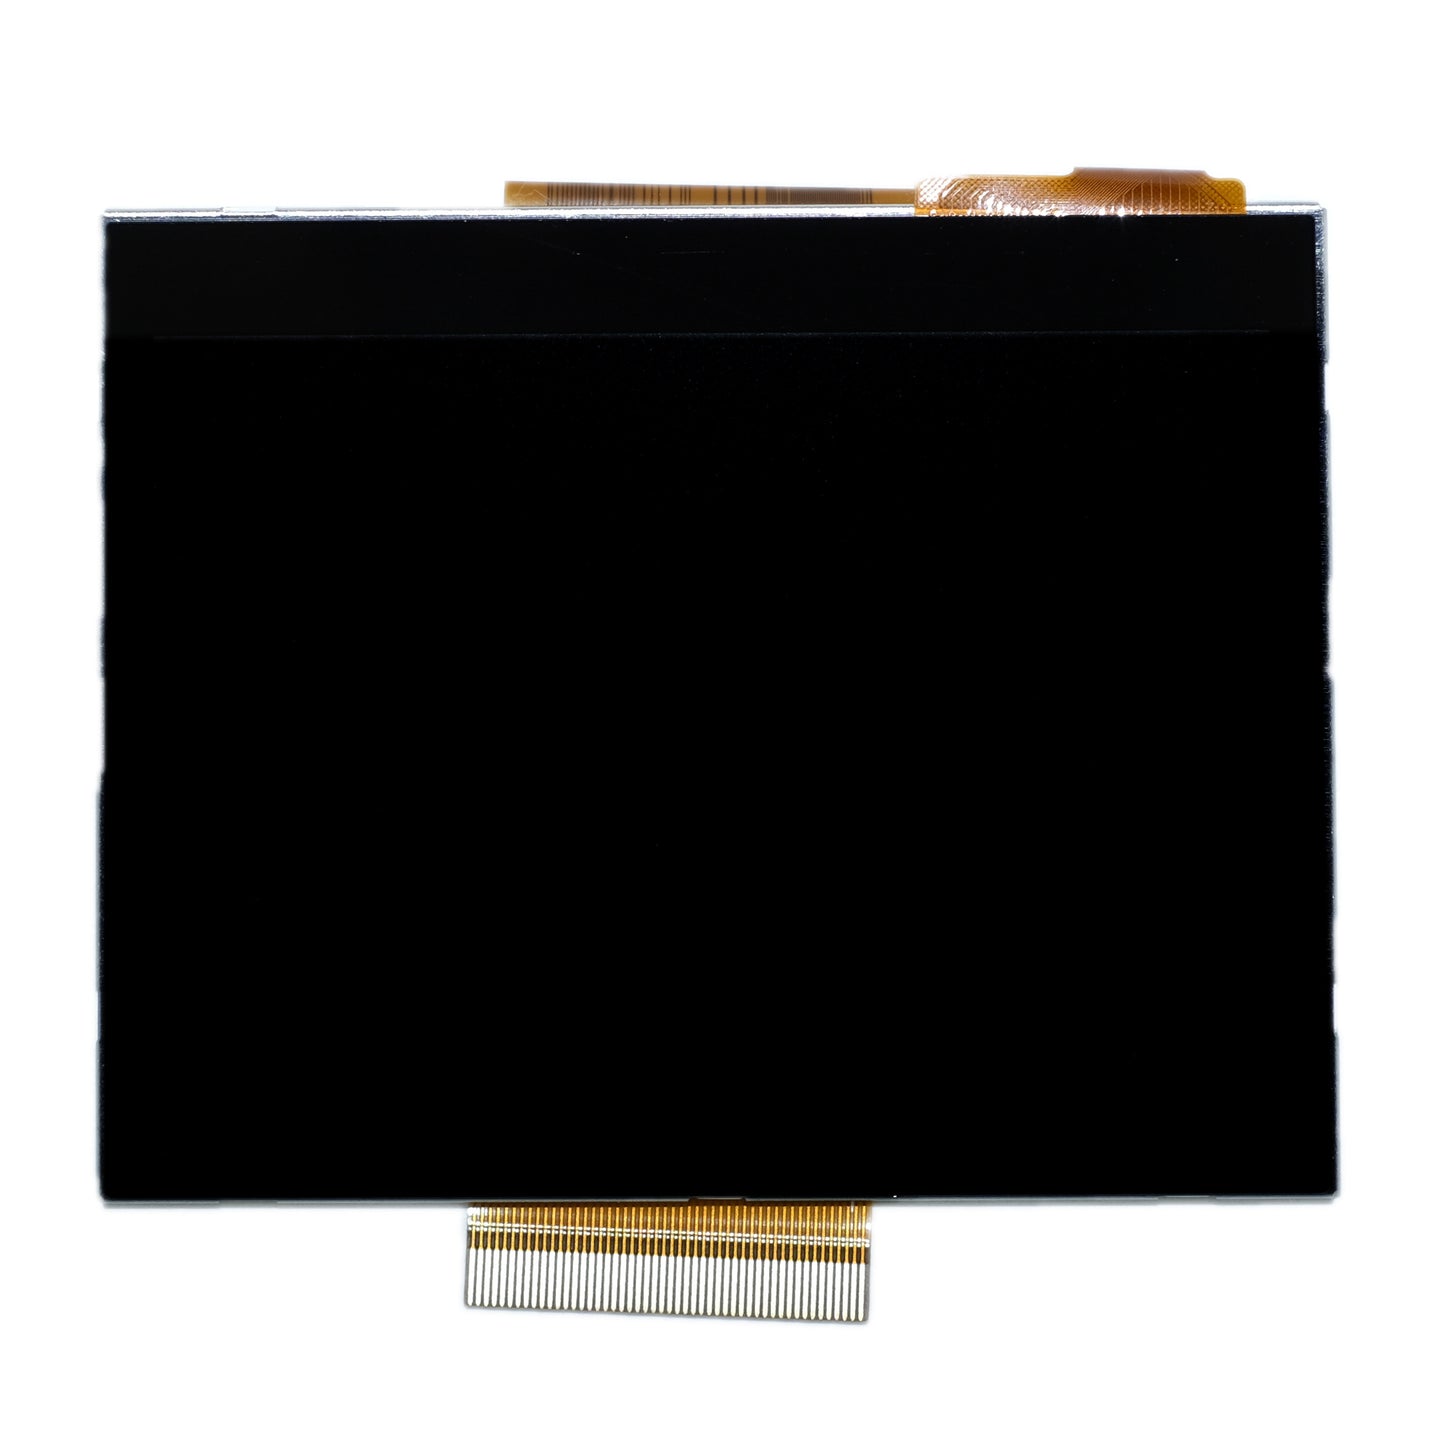 3.5-inch TFT display panel with 320x240 resolution, SSD2119 driver, capacitive touch, and SPI/MCU/RGB interface options